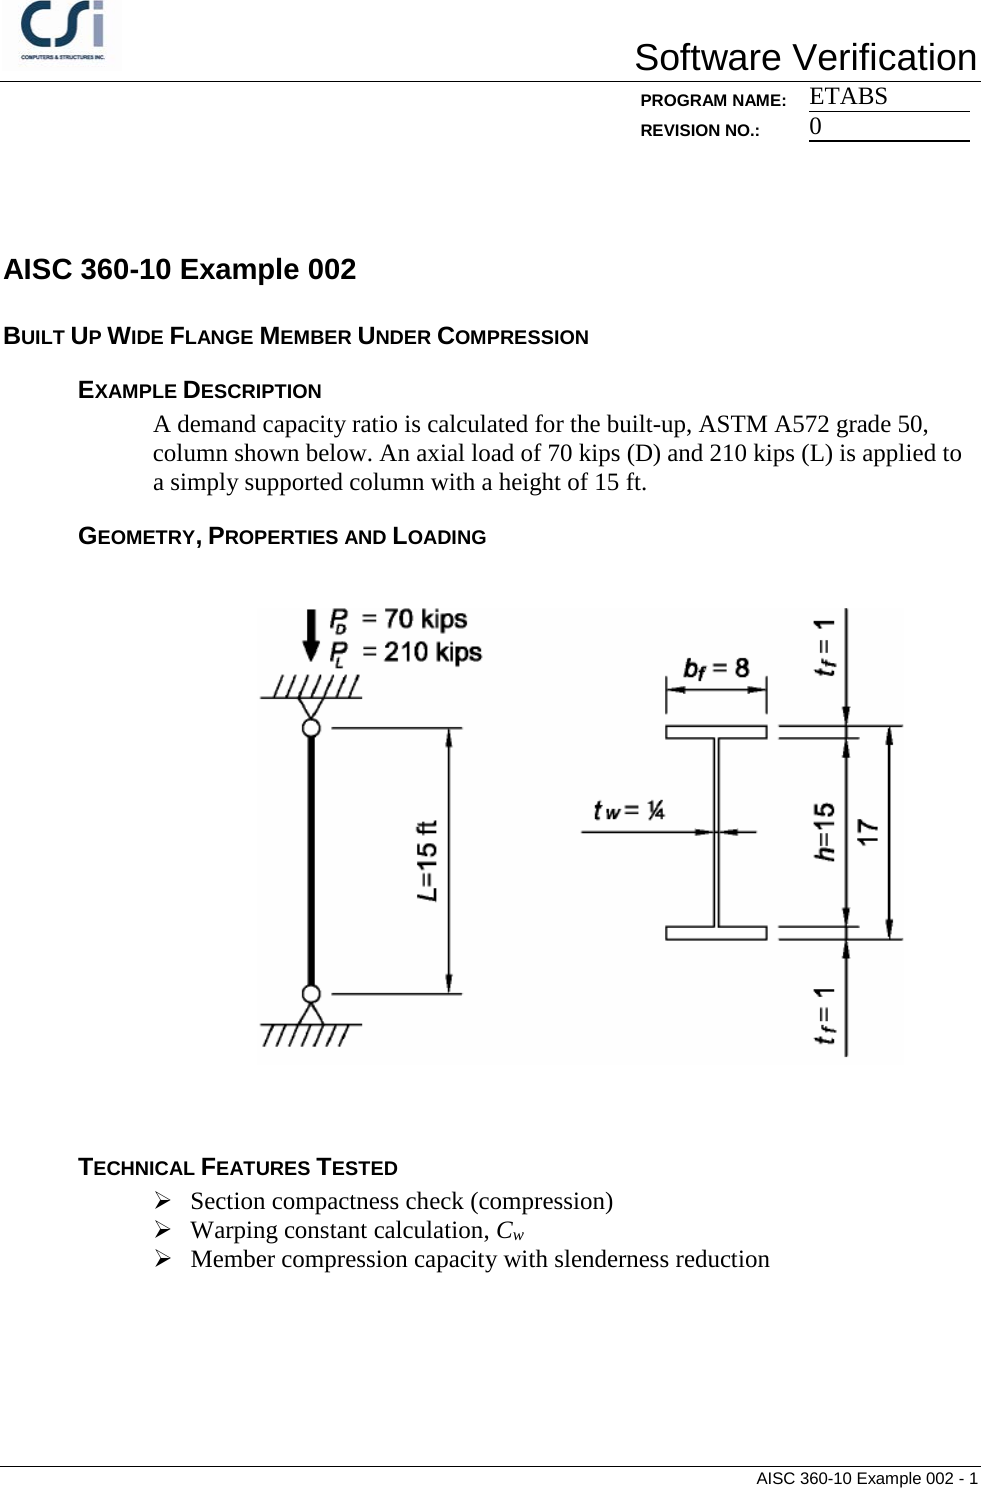 Contents Aisc 360 10 Example 002